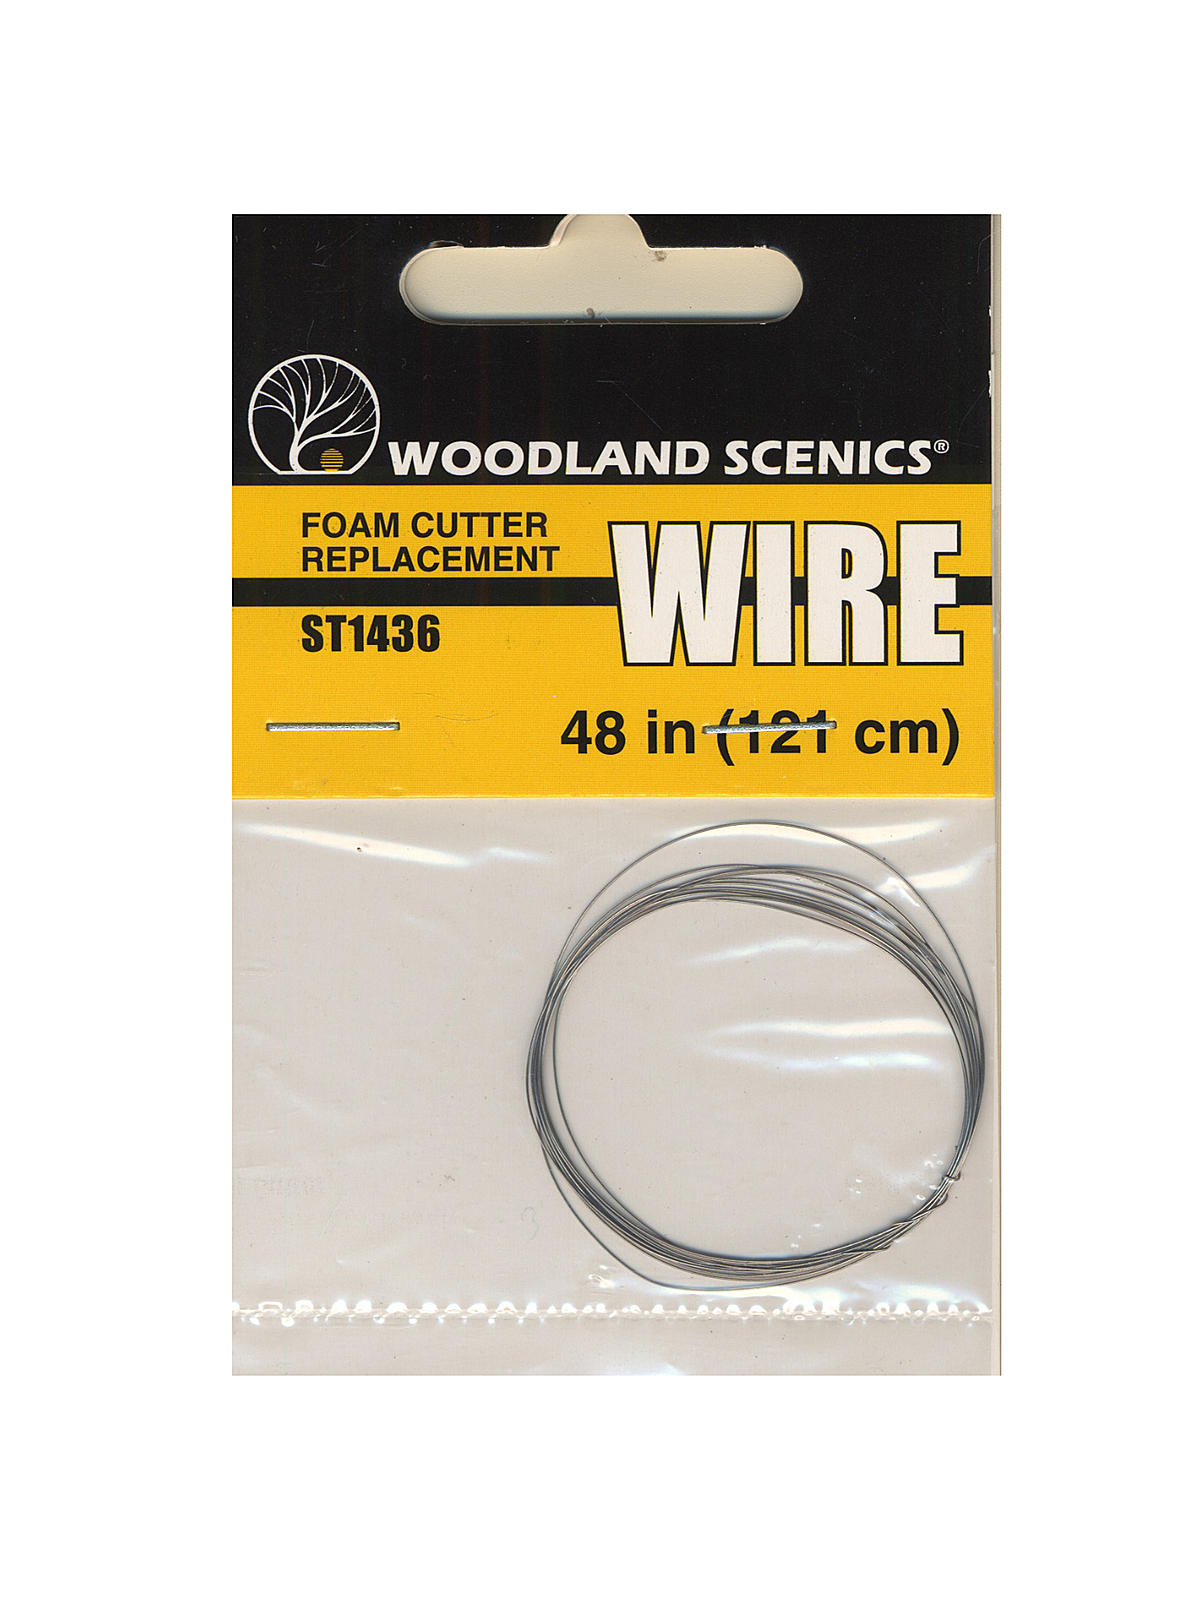 Woodland Scenics Hot Wire Replacement Wire 4‘ WOOST1436